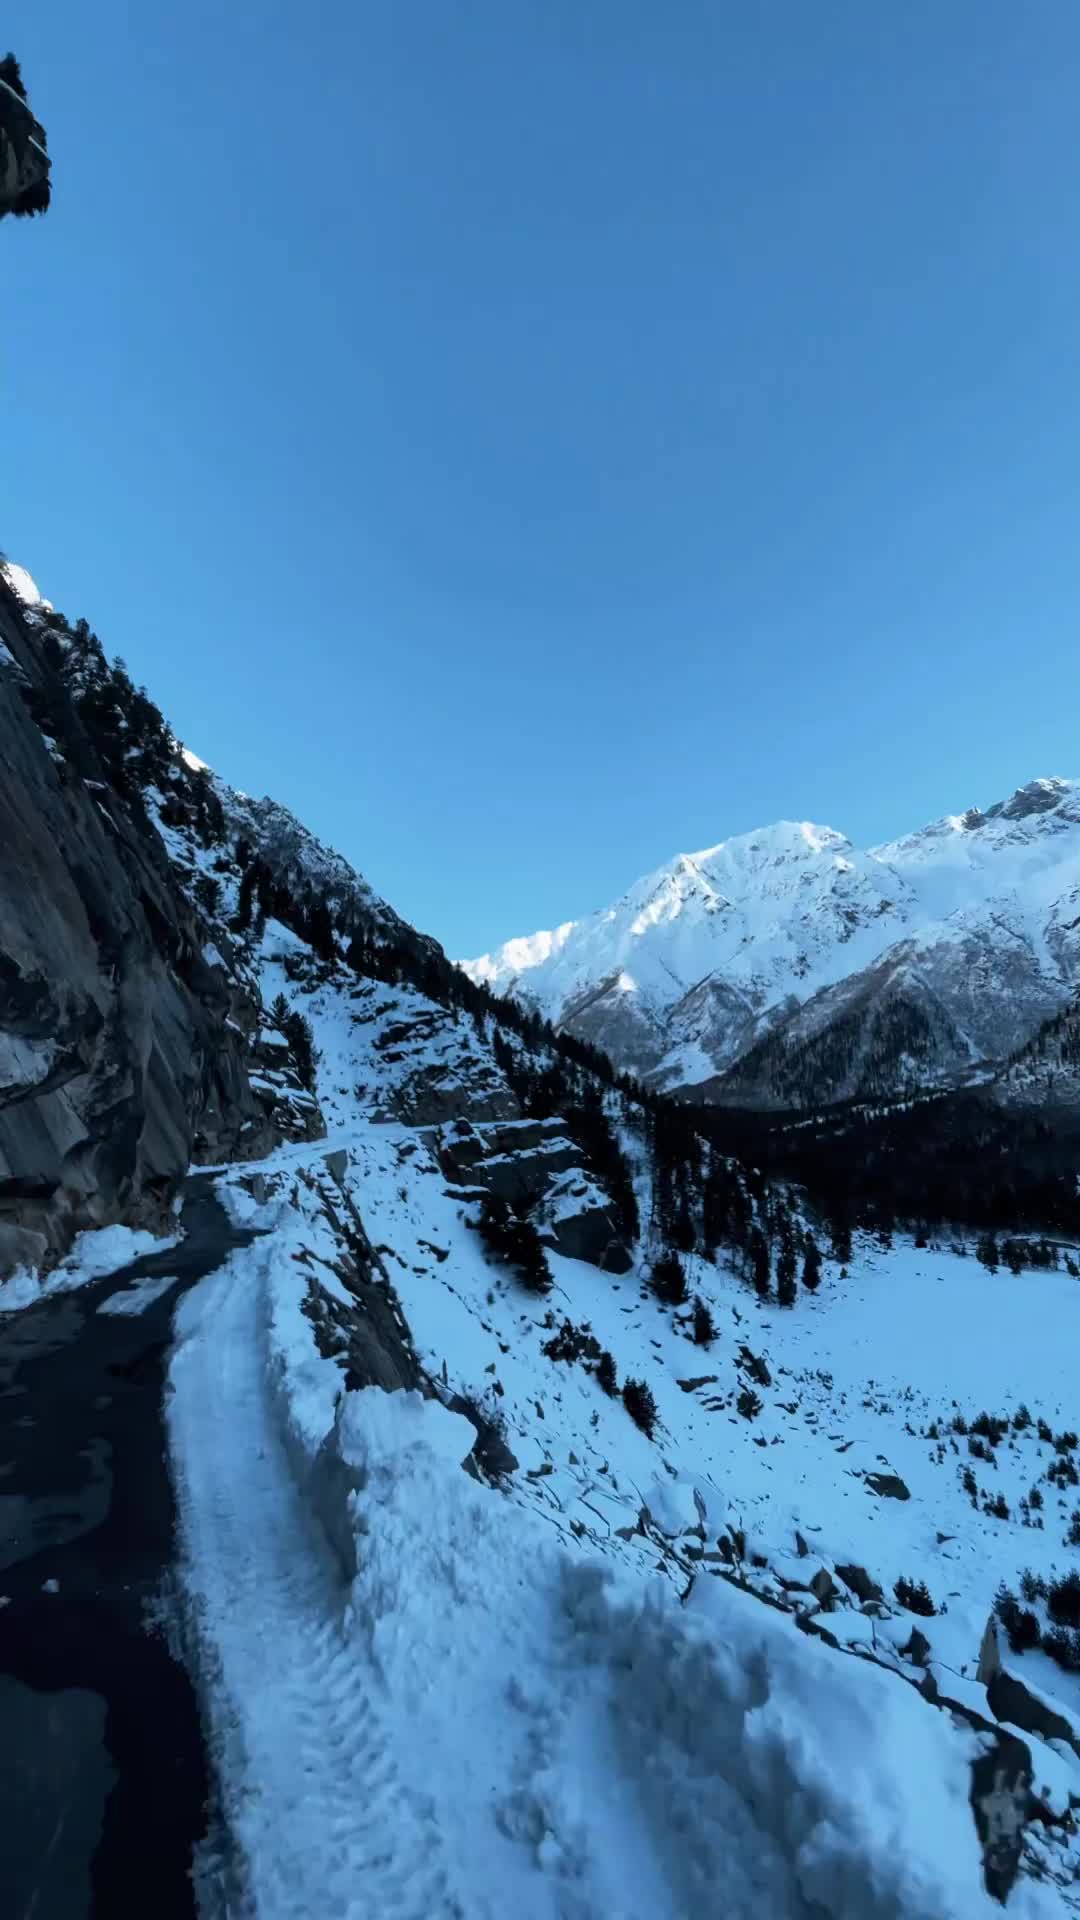 Stunning Winter Views of Sangla Valley's Mountains